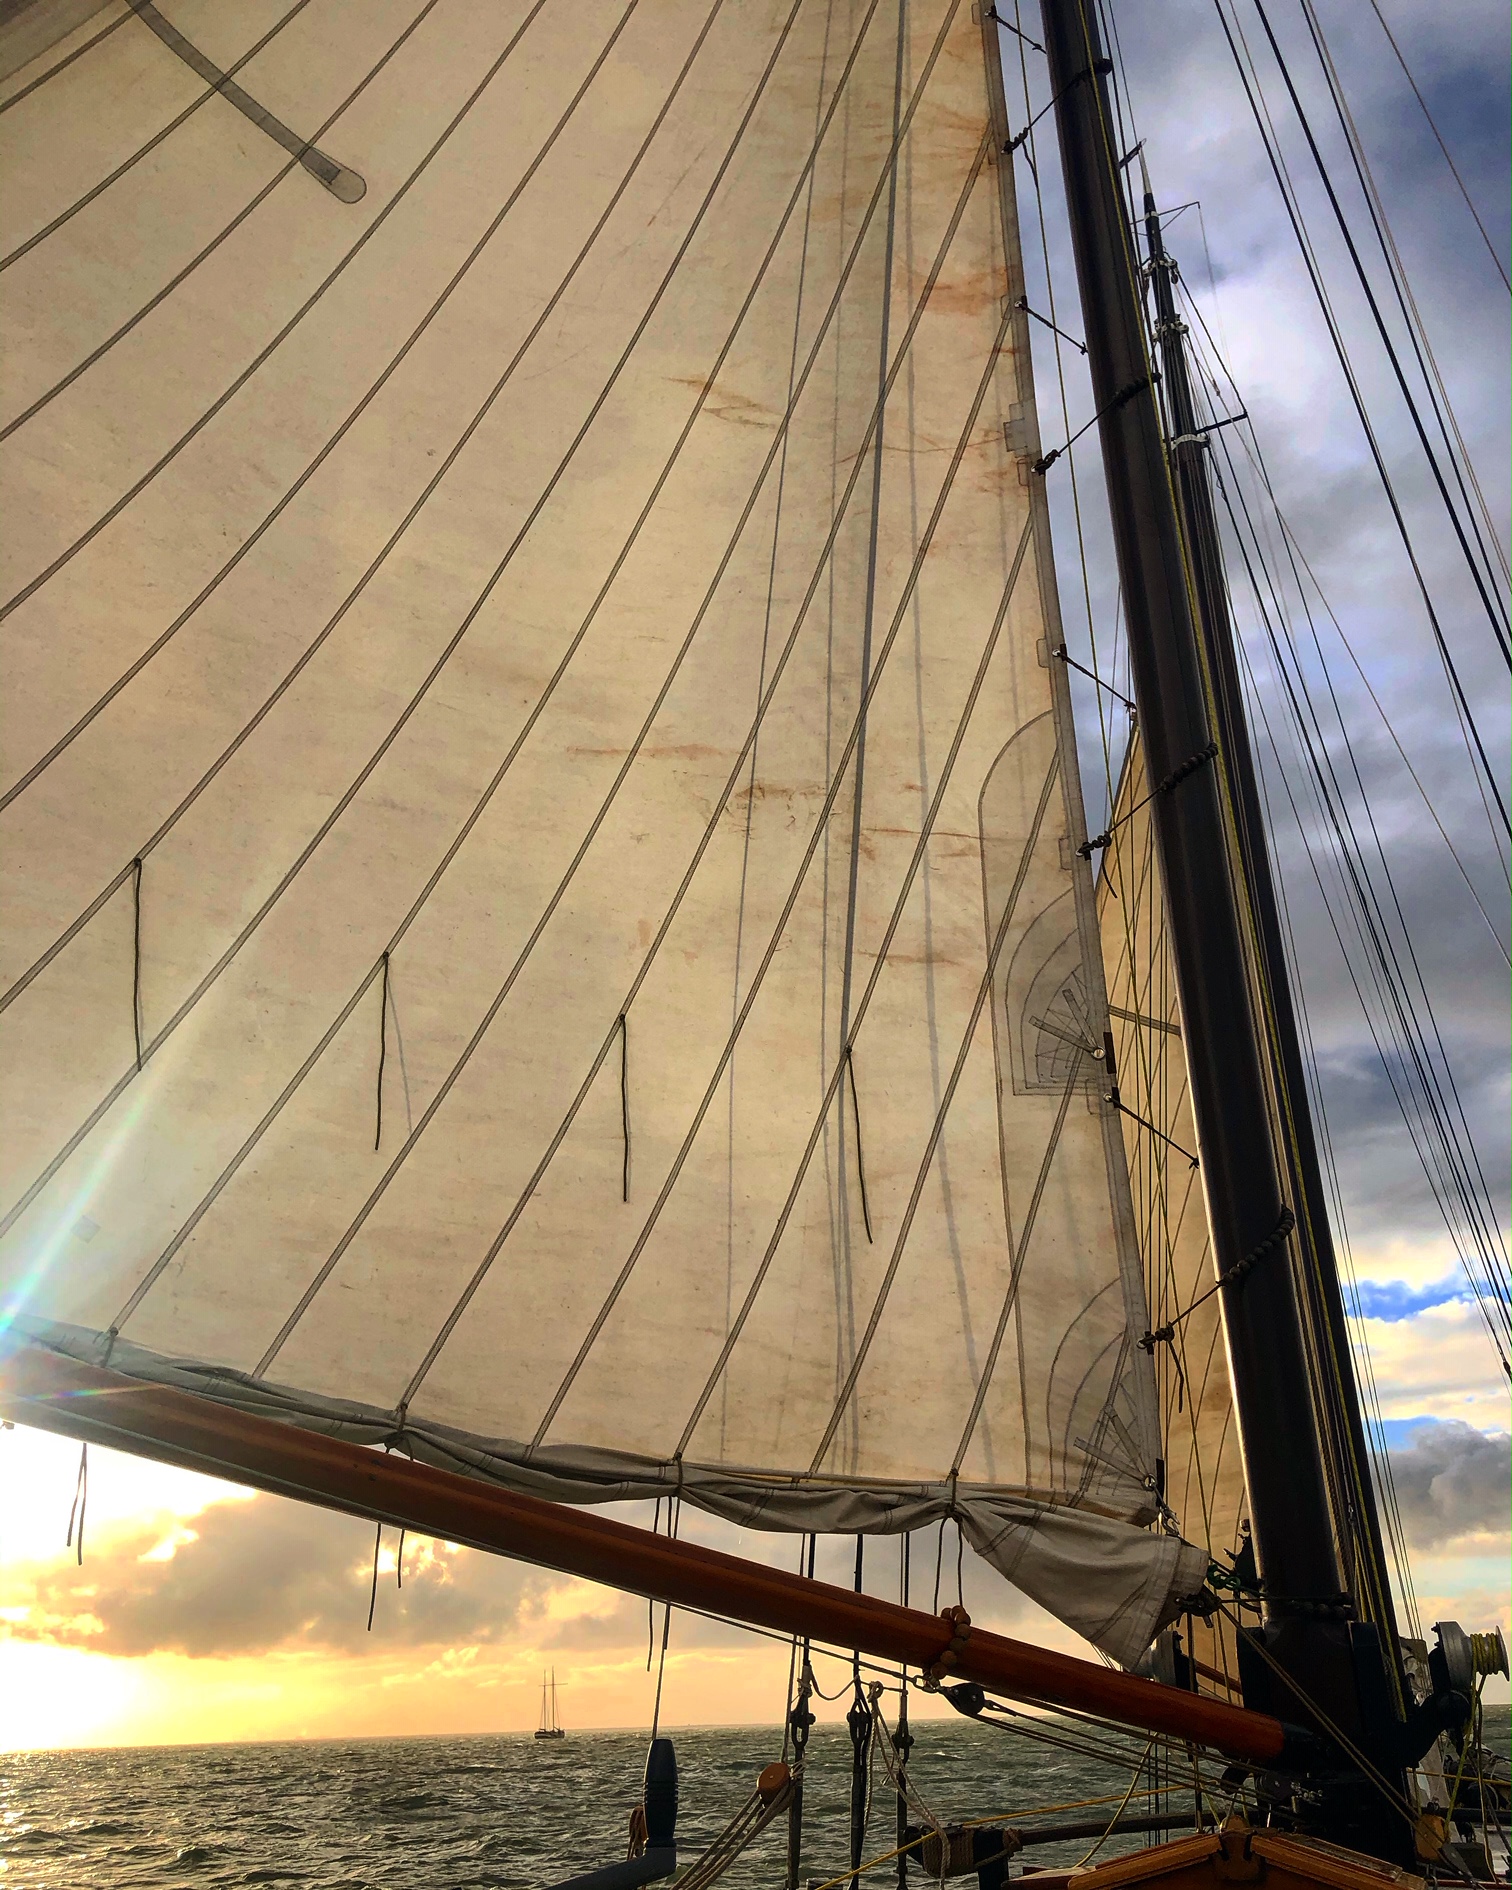 Sail the Wadden Sea with full sails